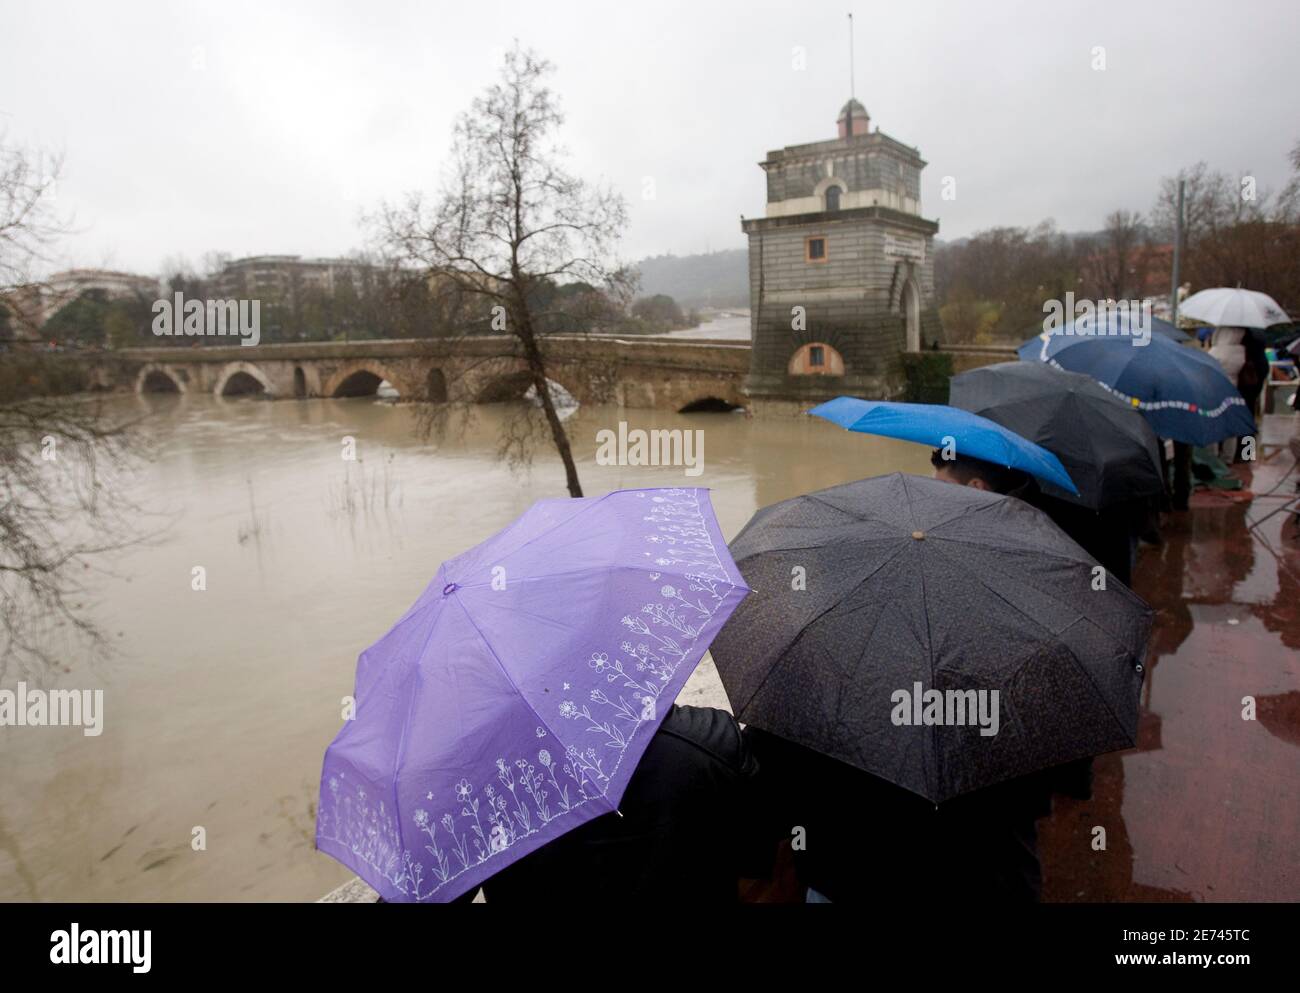 Pedestrians watch Milvio Bridge as Tiber river flows in downtown Rome December 12, 2008. Rome braced for the Tiber river to follow the smaller Aniene in bursting its banks on Friday, after days of rain and thunderstorms. Rome's mayor has declared a state of emergency after severe storms early on Thursday flooded underpasses, disrupted train and flight services and killed one person.   REUTERS/Alessandro Bianchi        (ITALY) Stock Photo